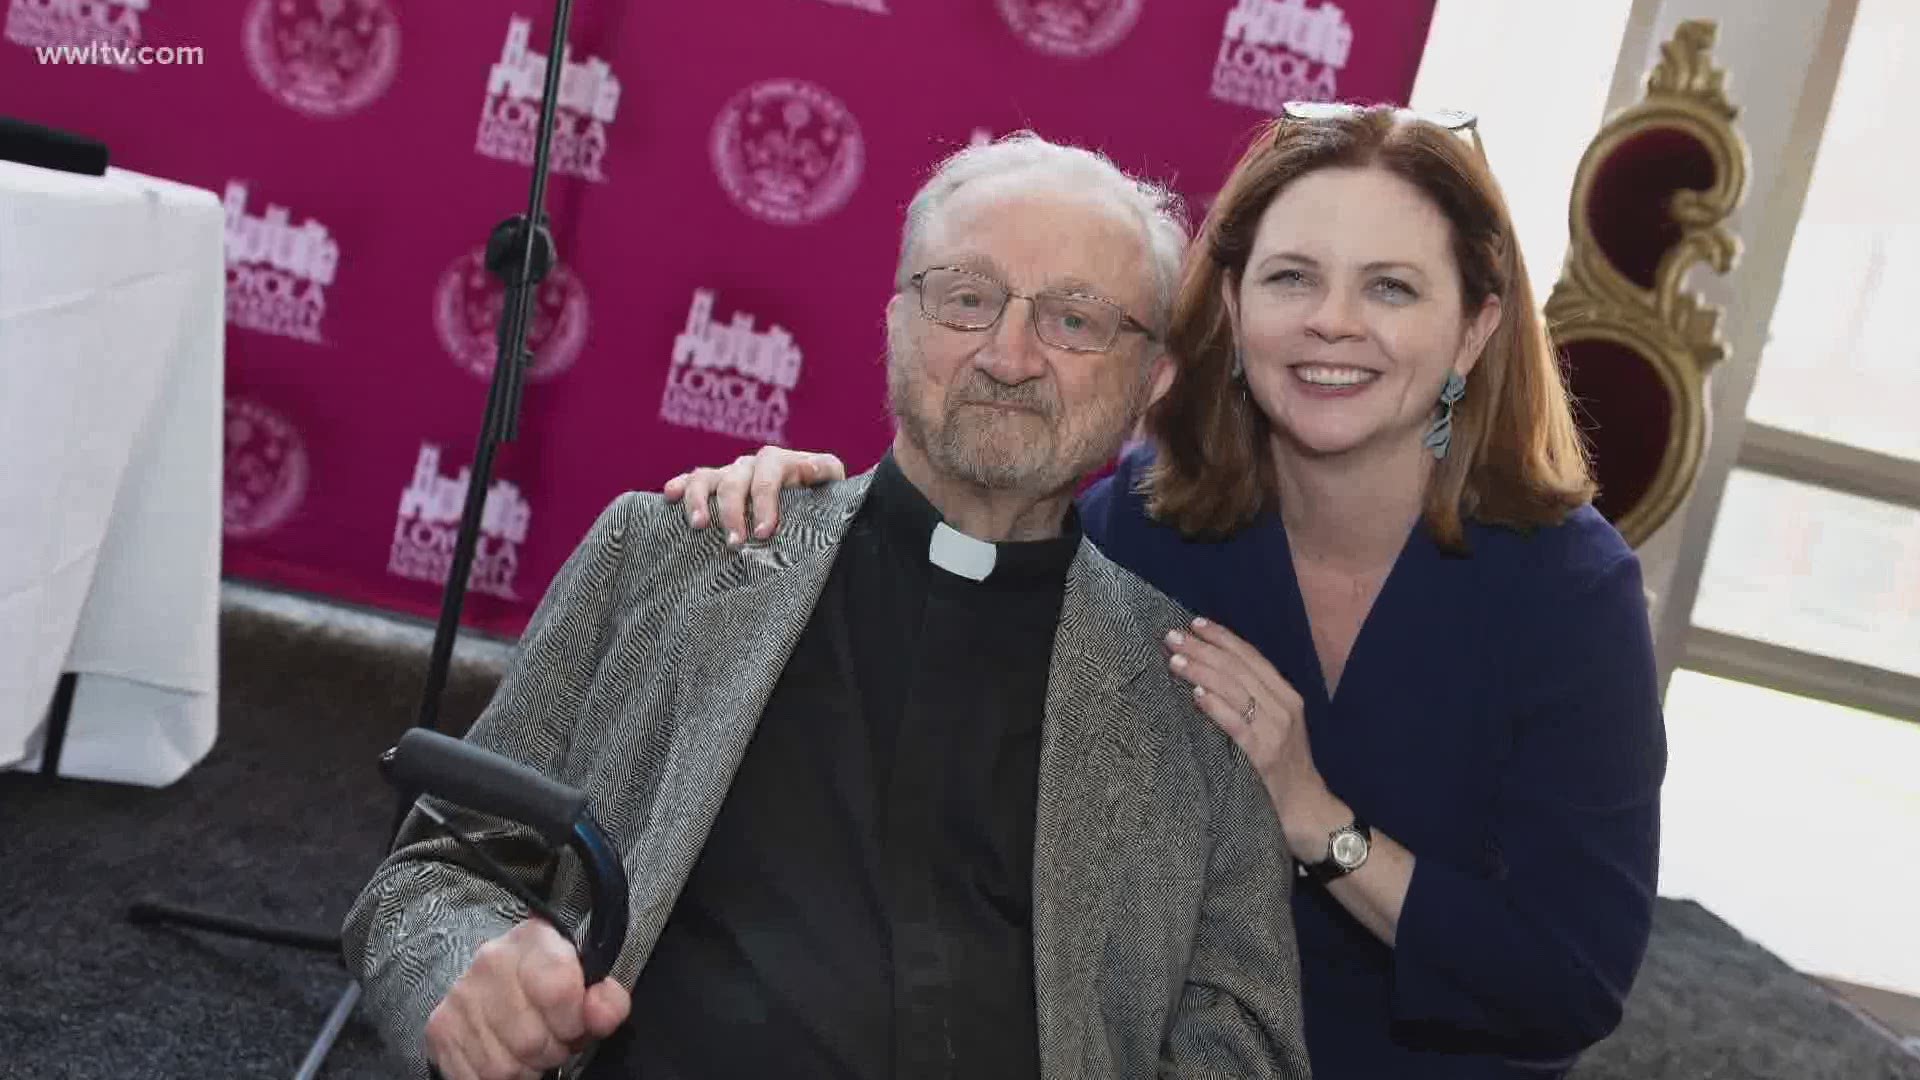 Loyola's longest-serving president, who turns 93 this month, is leaving the campus after 60 years but still not quite ready to retire